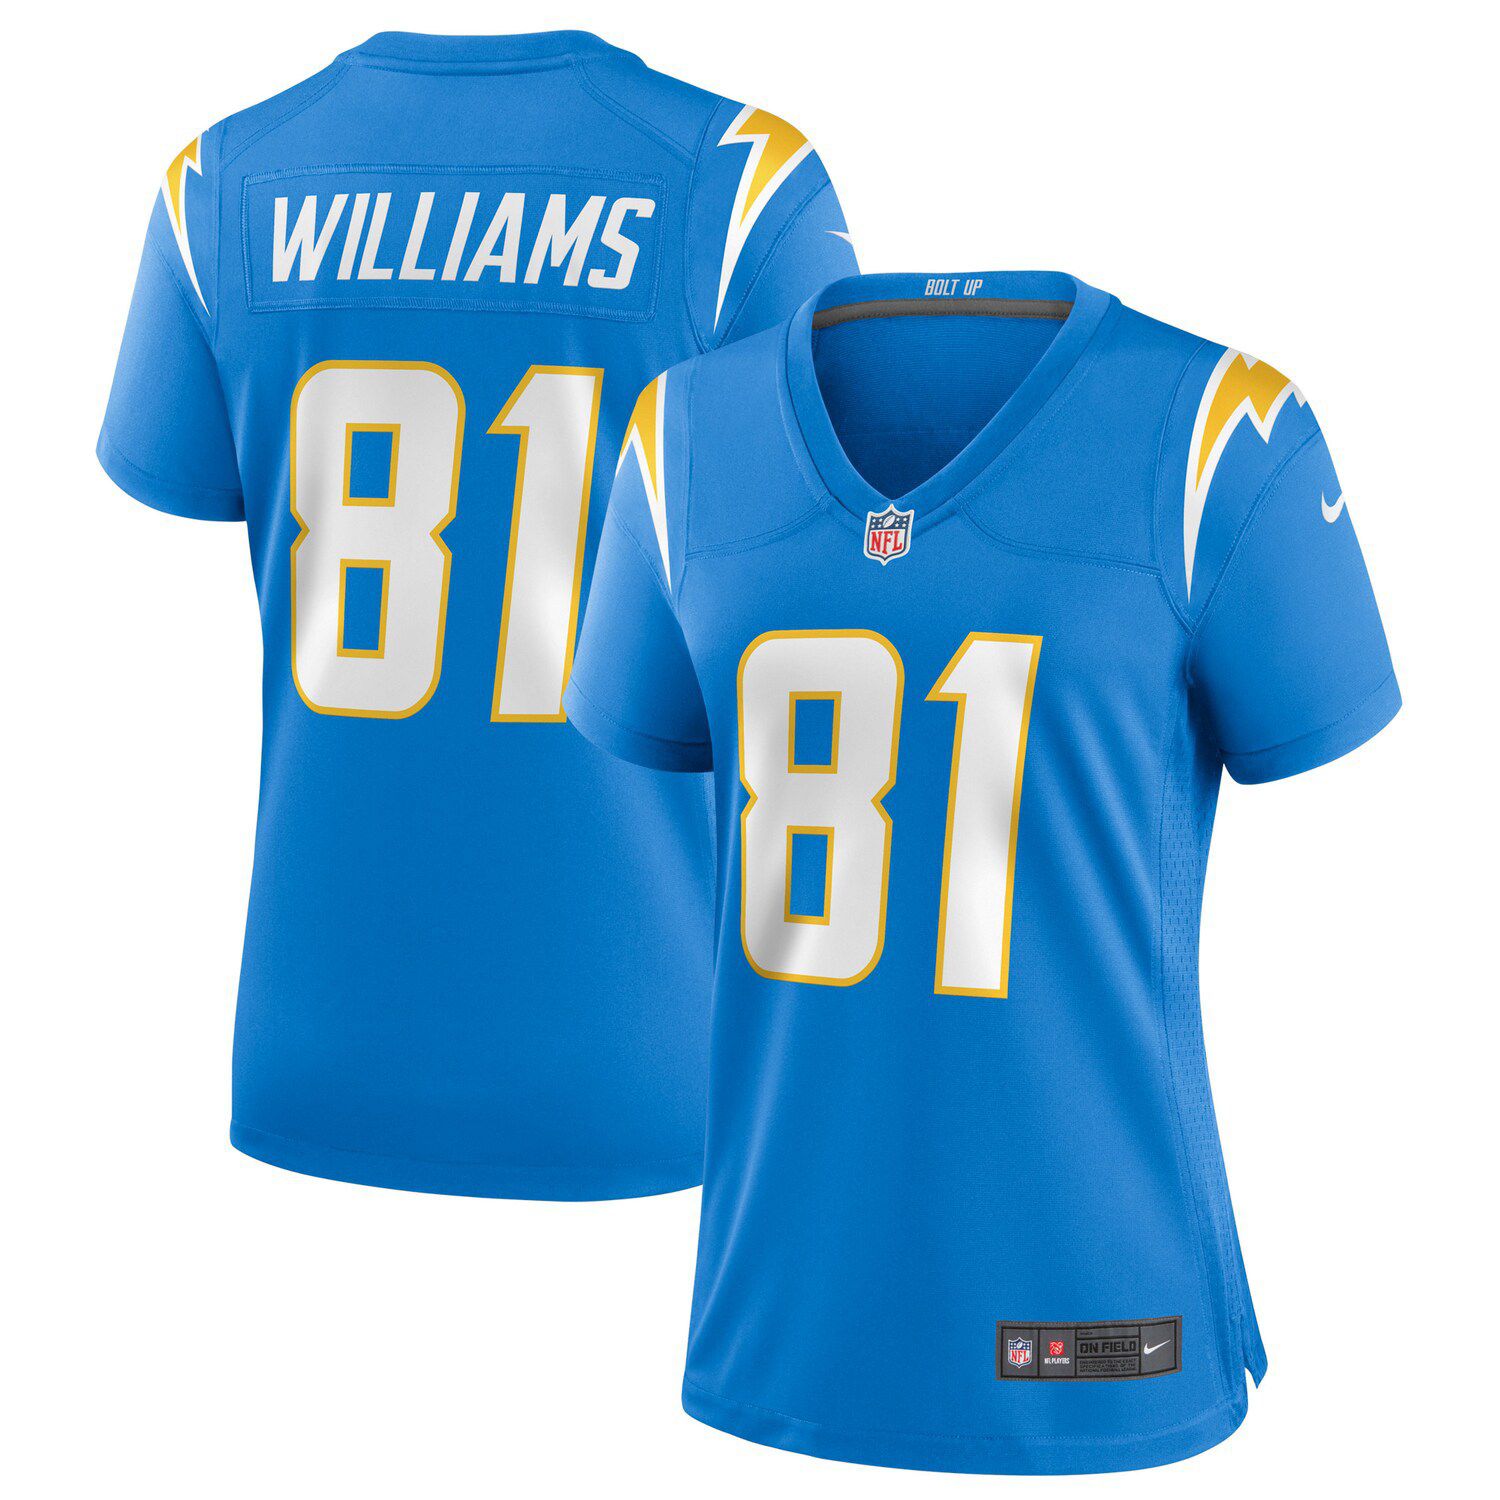 Los Angeles Chargers Women's Jersey